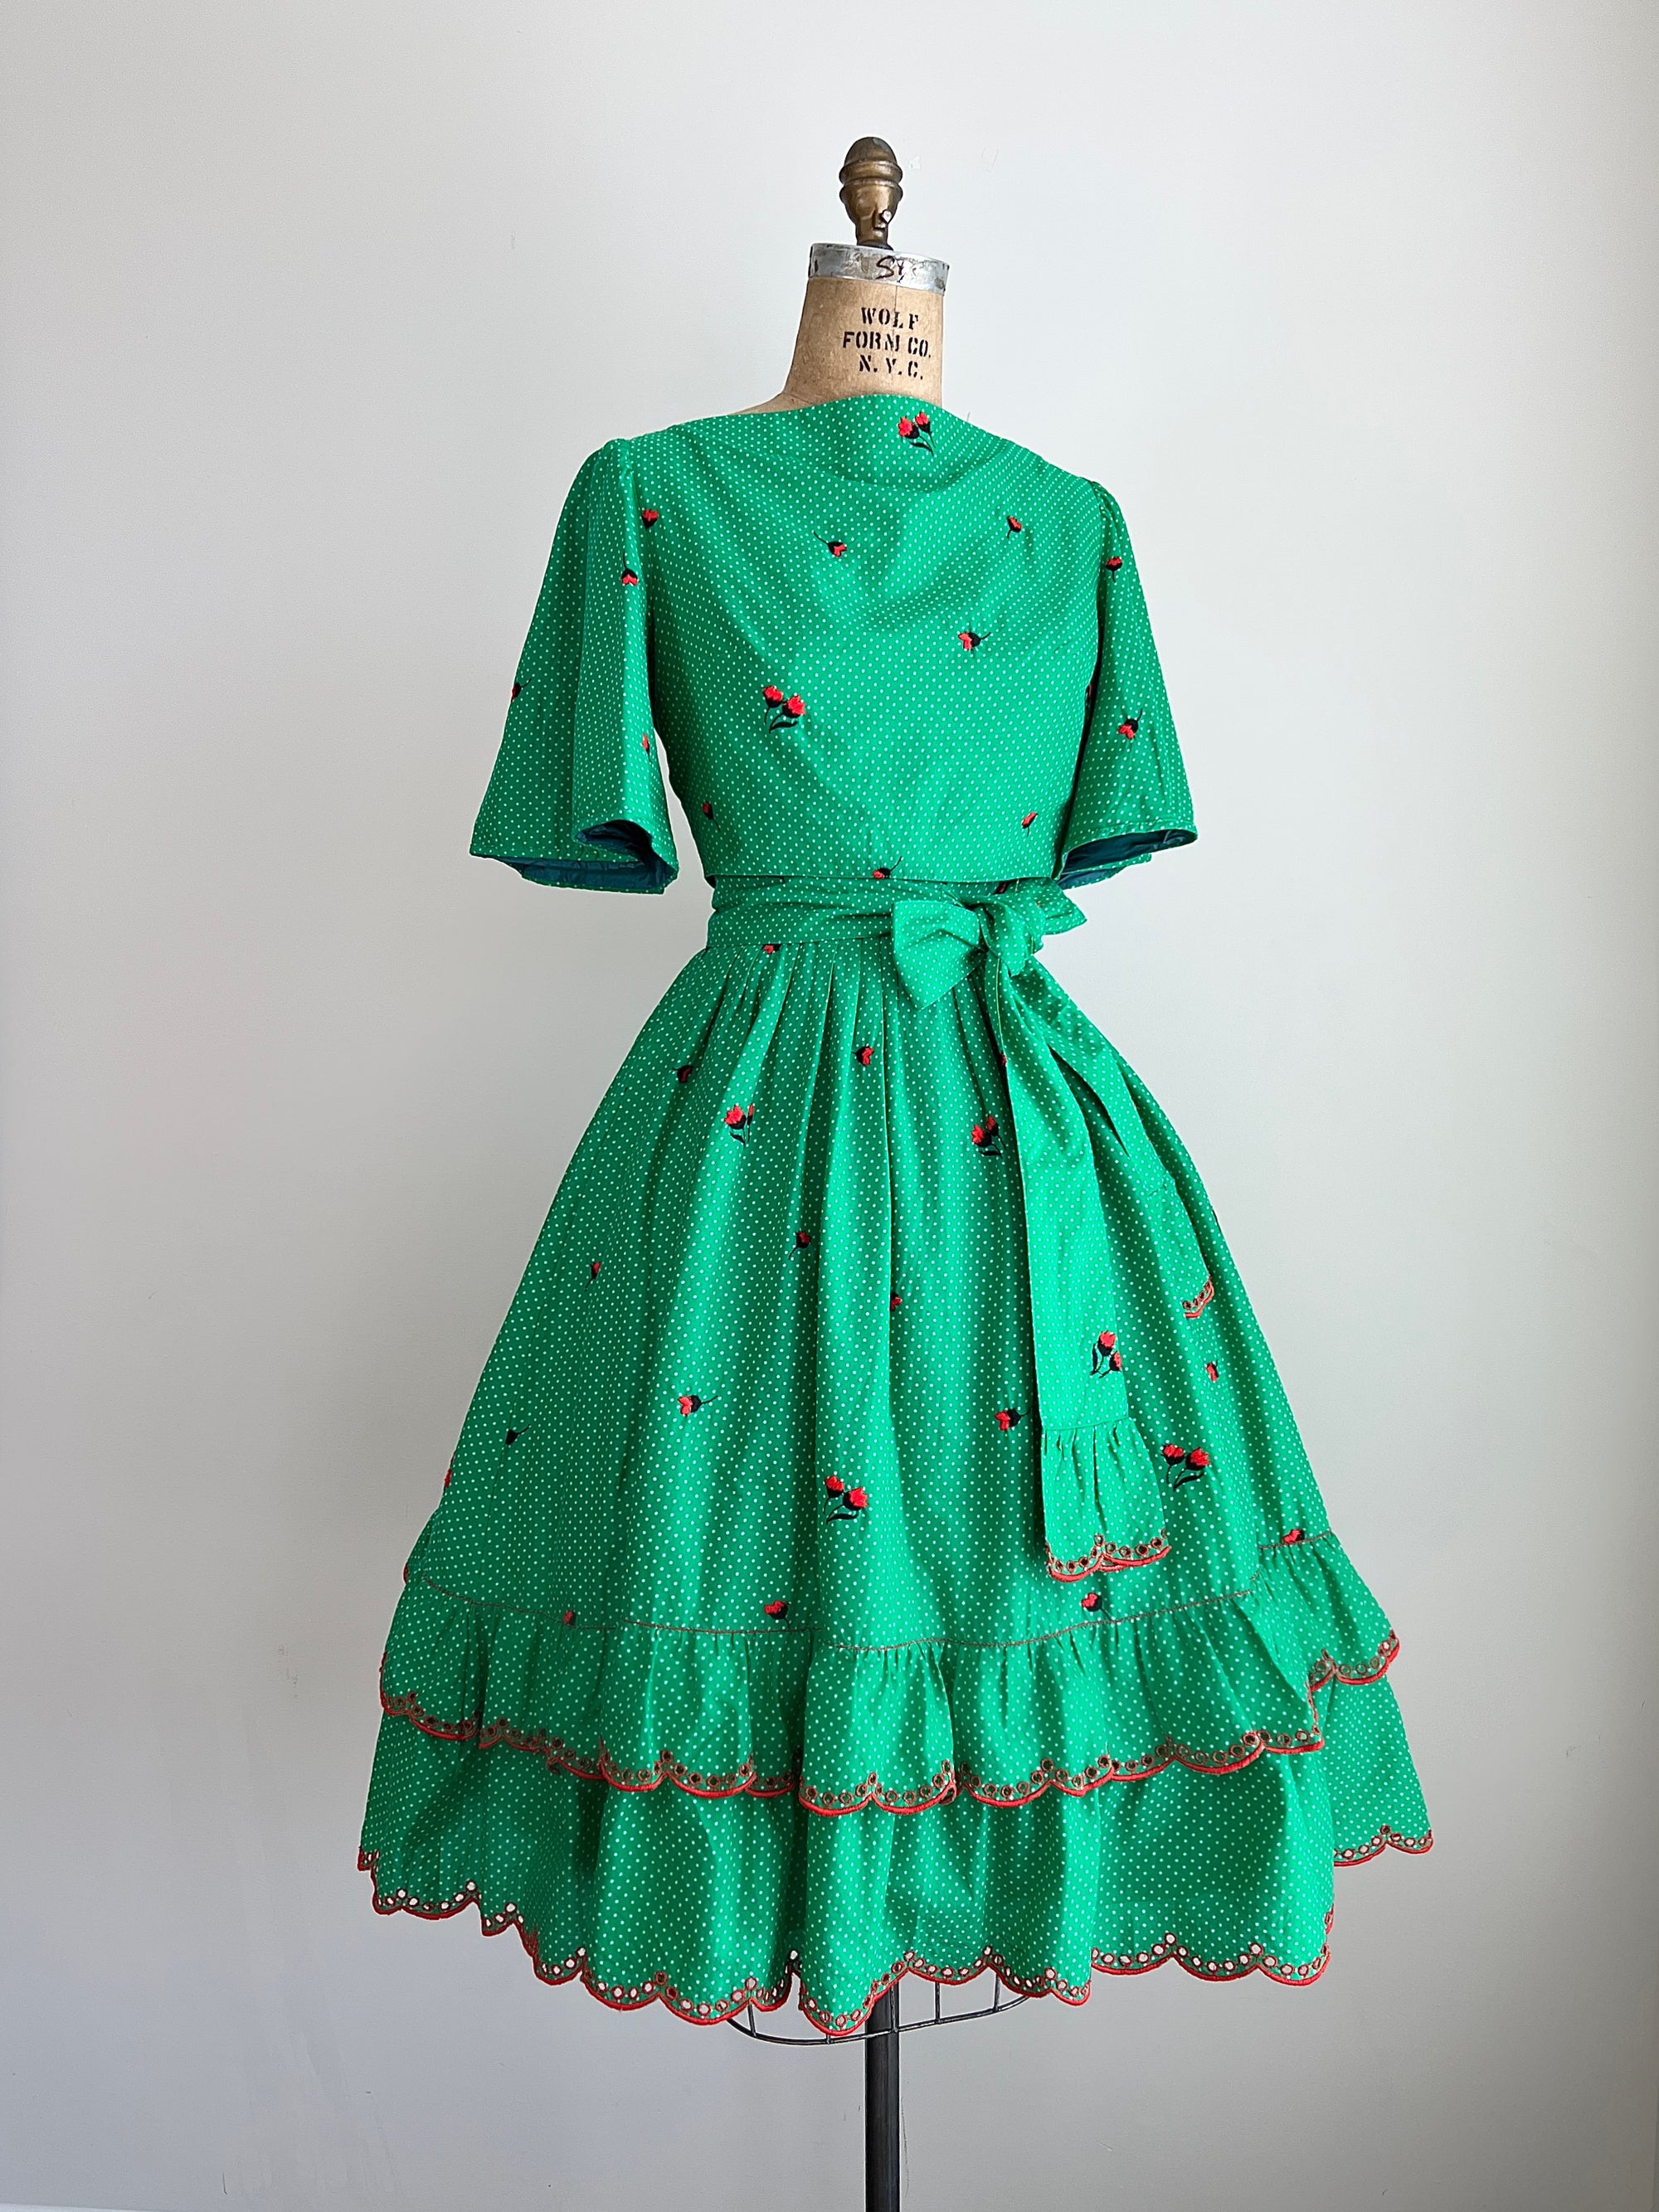 1960s Embroidered Green 2-Piece Dress with Flutter Sleeves / Small-Medium